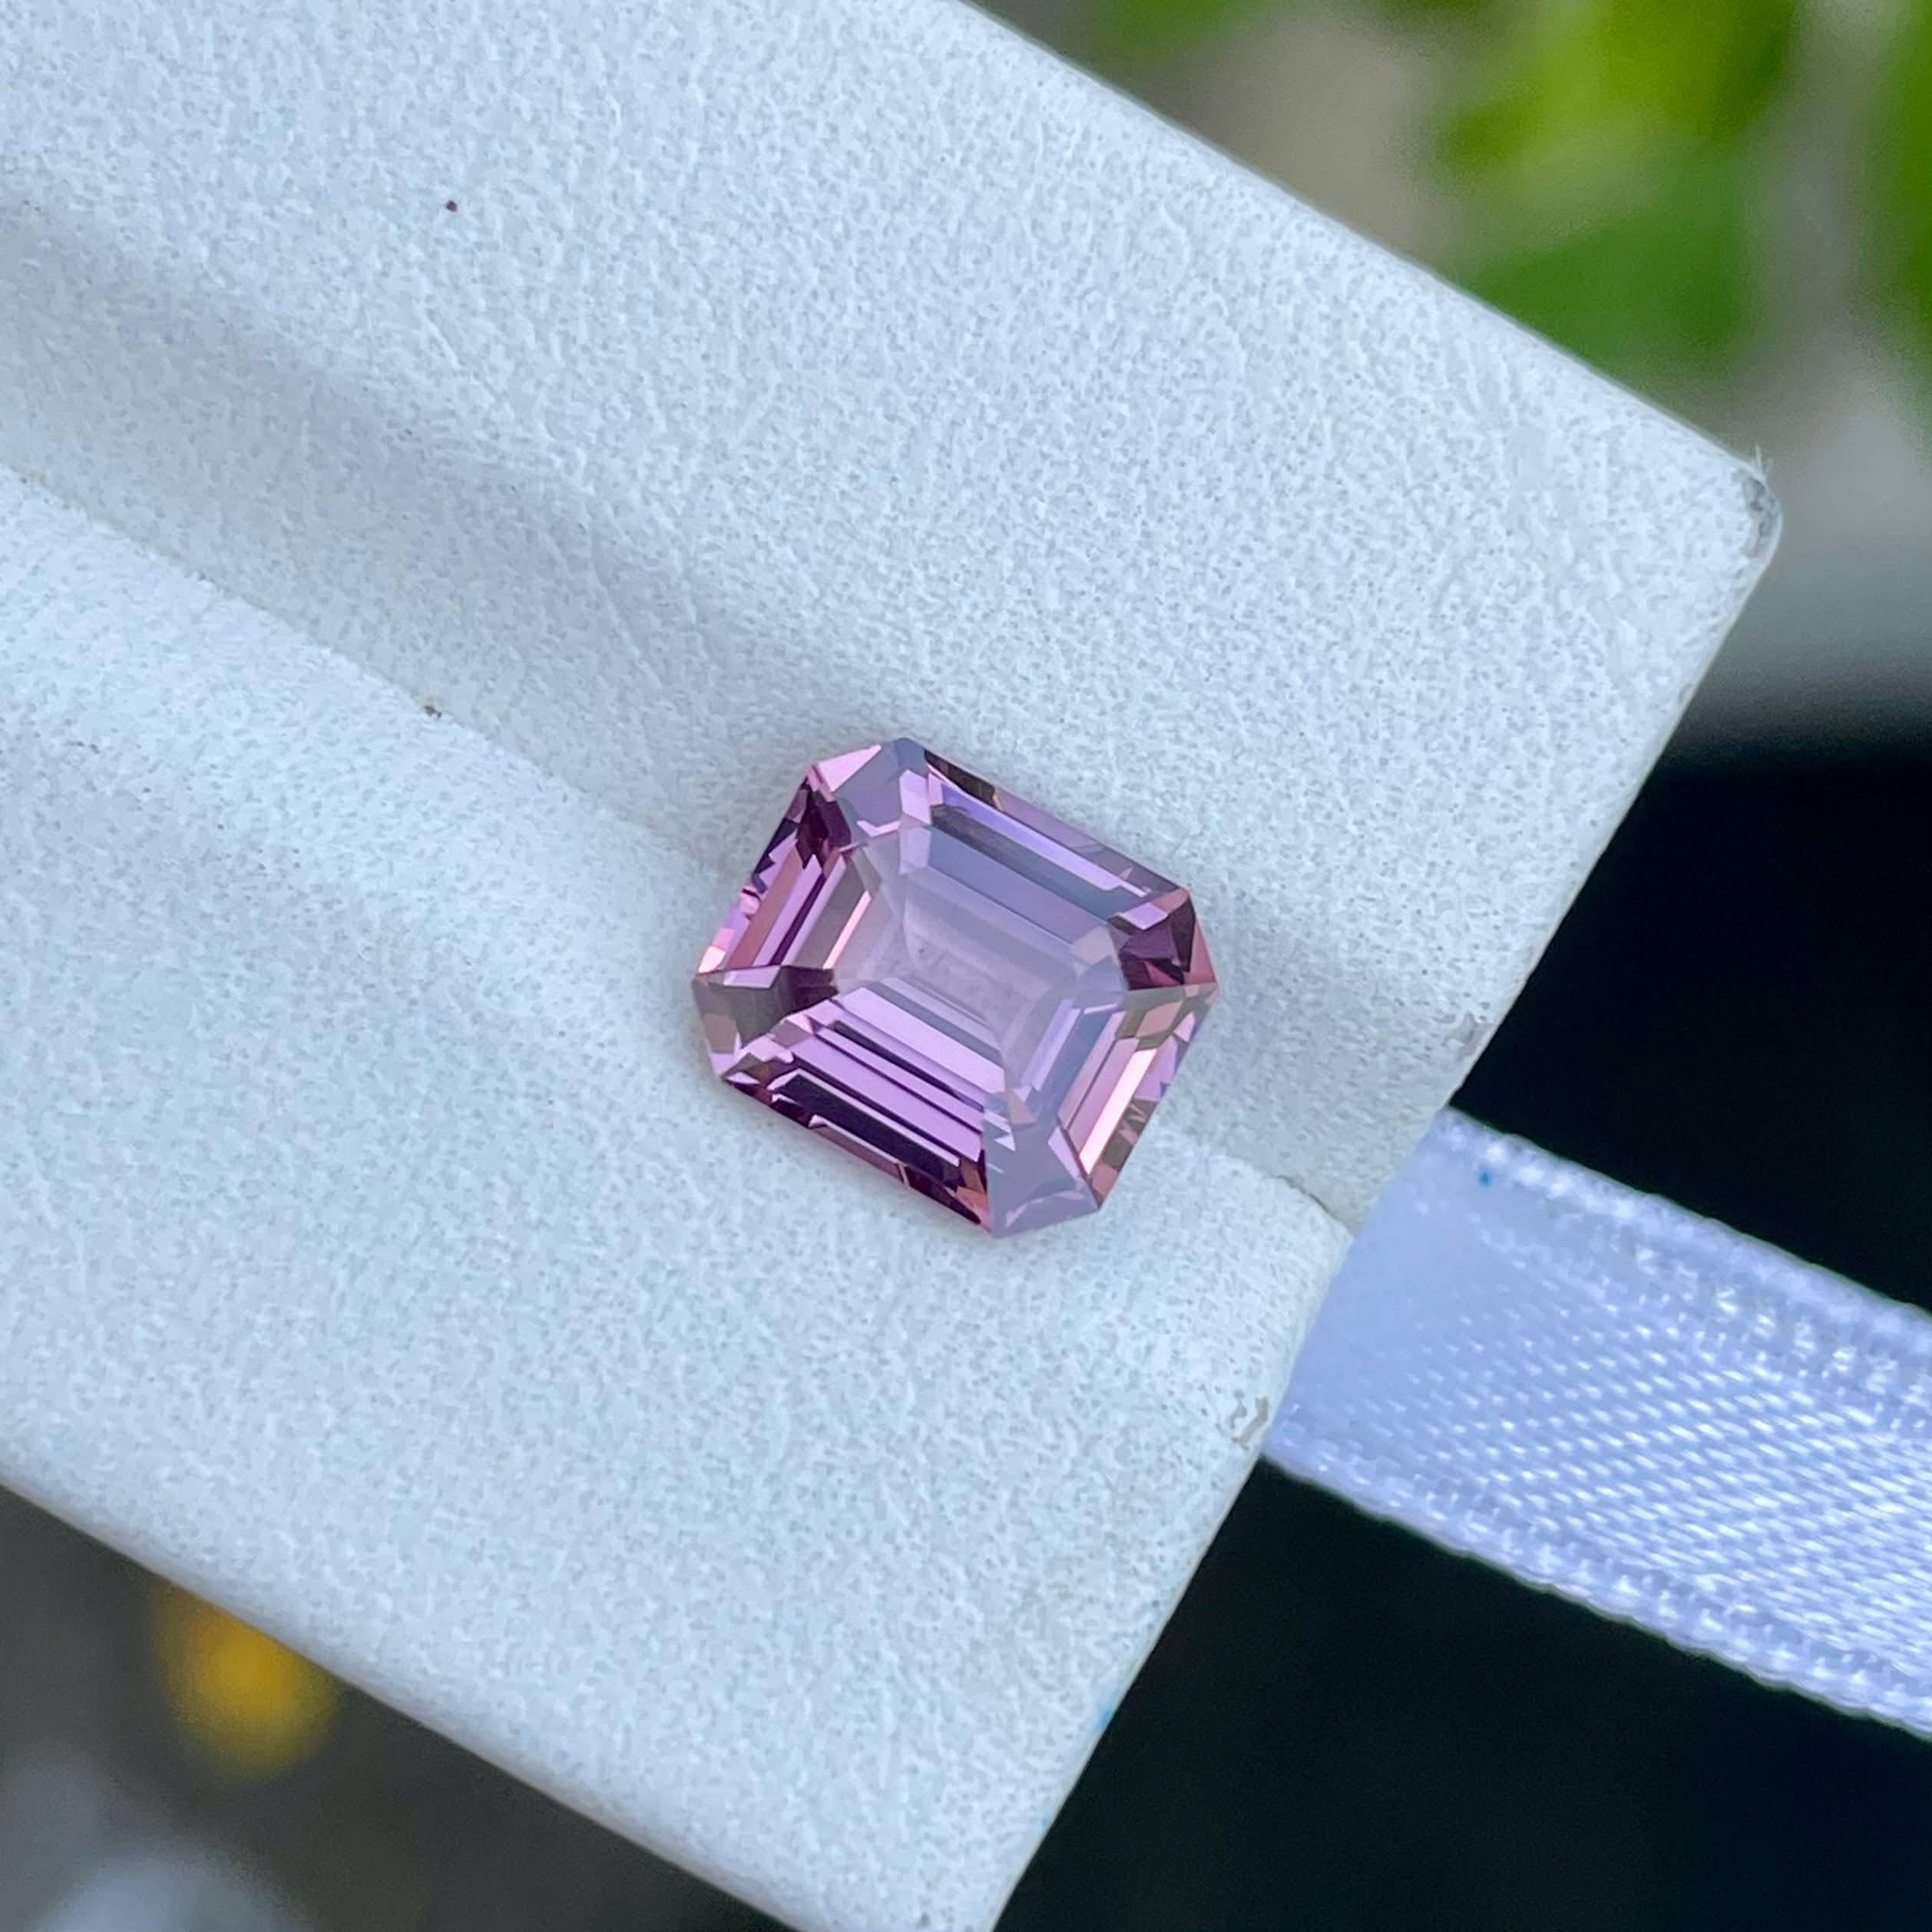 Weight 2.55 Carats
Dimensions 8.5x7.3x4.5 mm
Treatment None
Clarity Loop Clean
Origin Burma
Shape Octagon
Cut Emerald




Pink Spinel, a captivating gemstone that exudes grace and sophistication. This natural Brumes gemstone, boasting a substantial